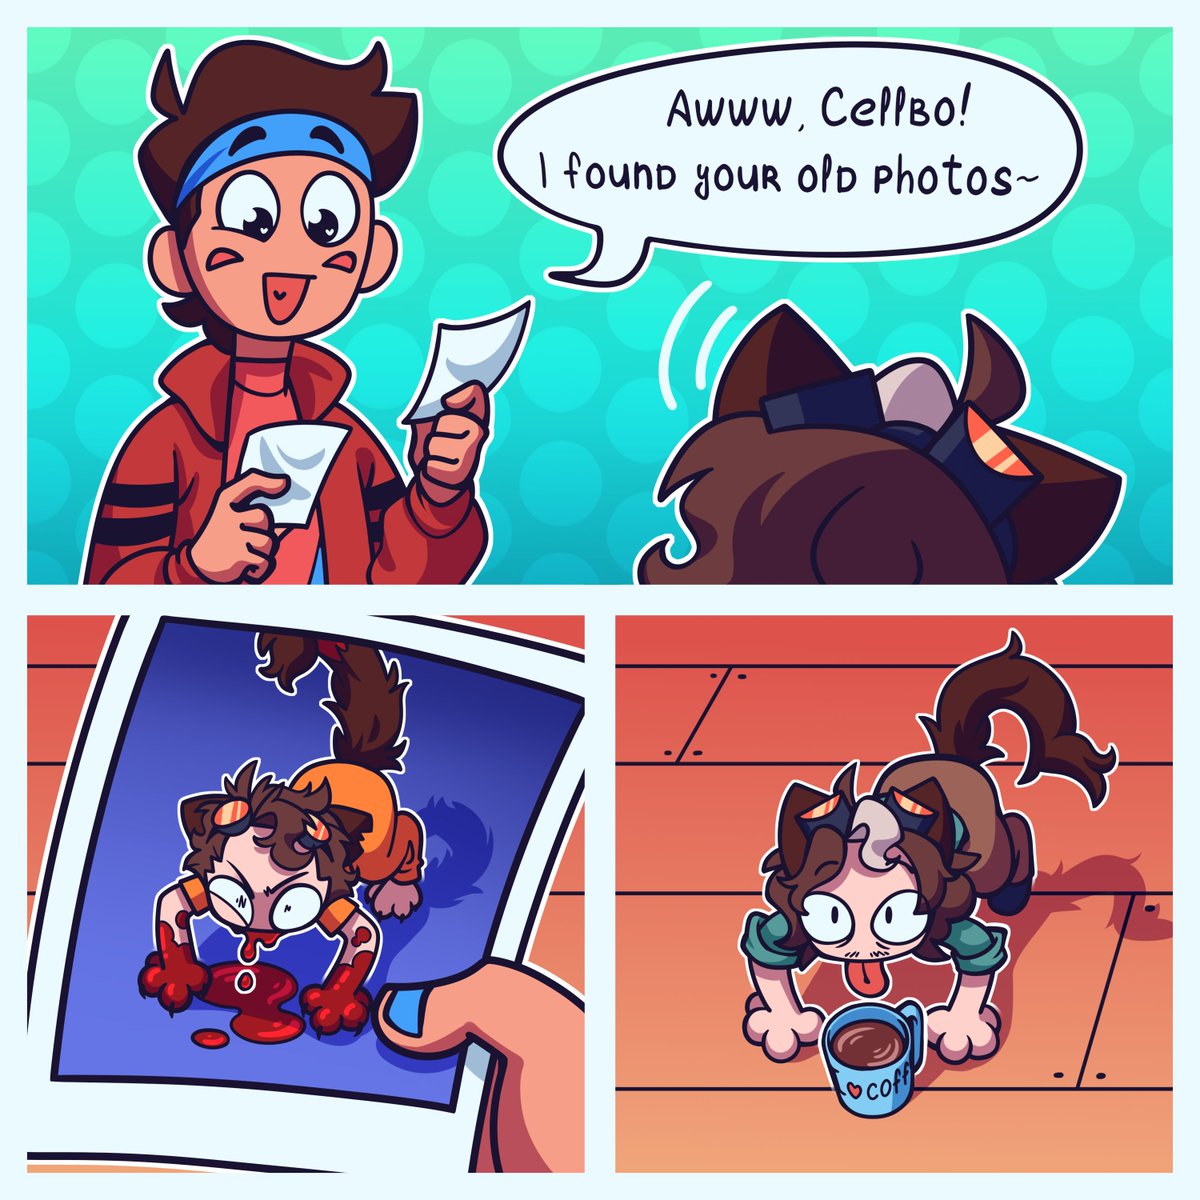 [Cellkitty 2 - 1]

I love those photo compilations where adopted cats become more and more happy 
It melts my heart ;w;

#cellkitty #cellbitfanart #roierfanart #guapoduo #guapoduofanart #qsmpfanart #qsmp